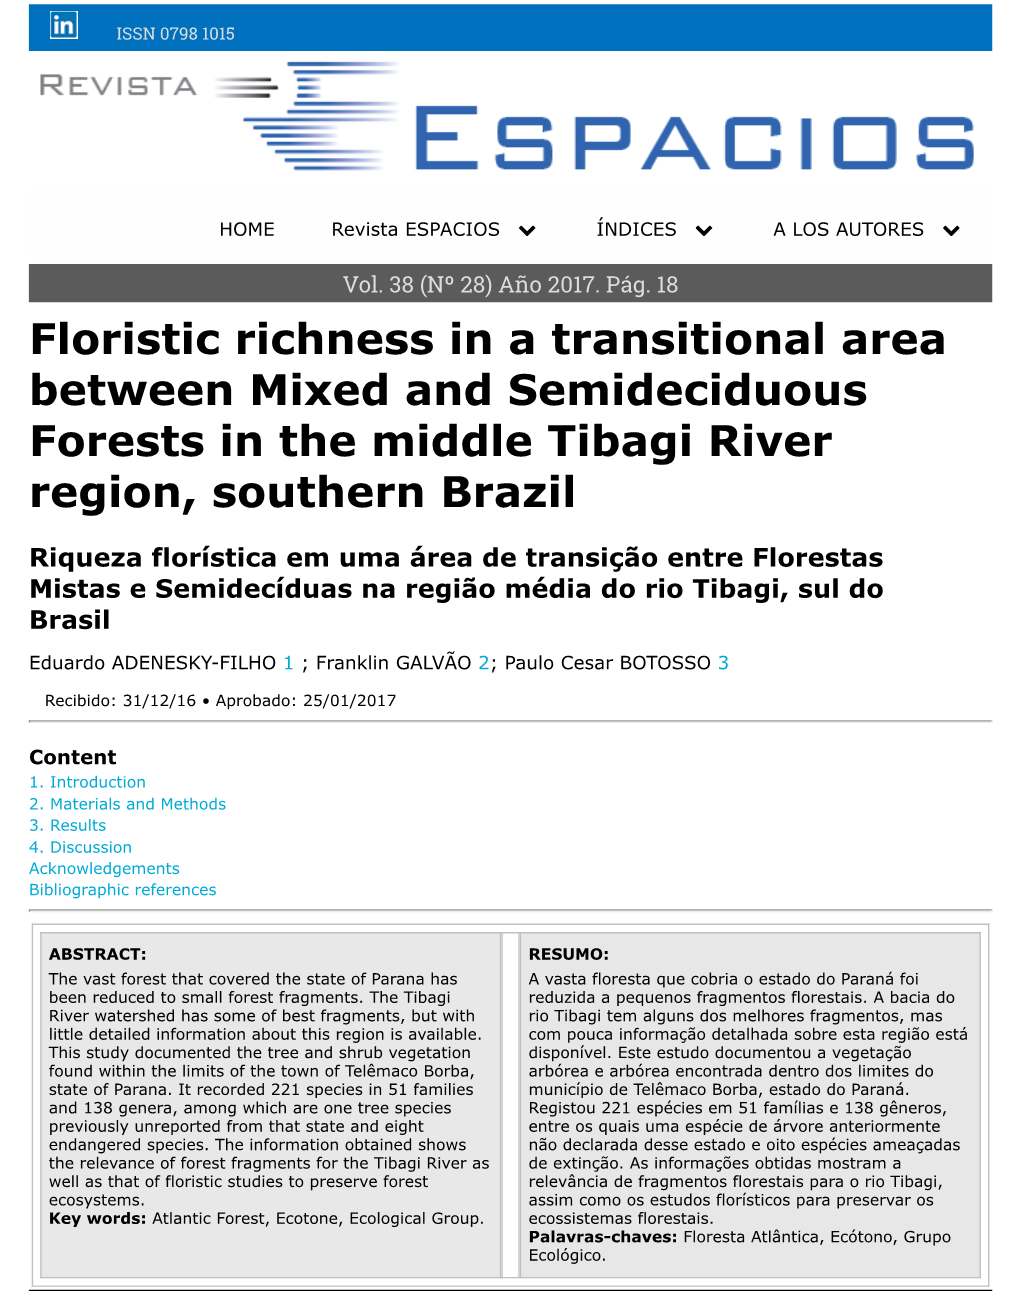 Floristic Richness in a Transitional Area Between Mixed and Semideciduous Forests in the Middle Tibagi River Region, Southern Brazil